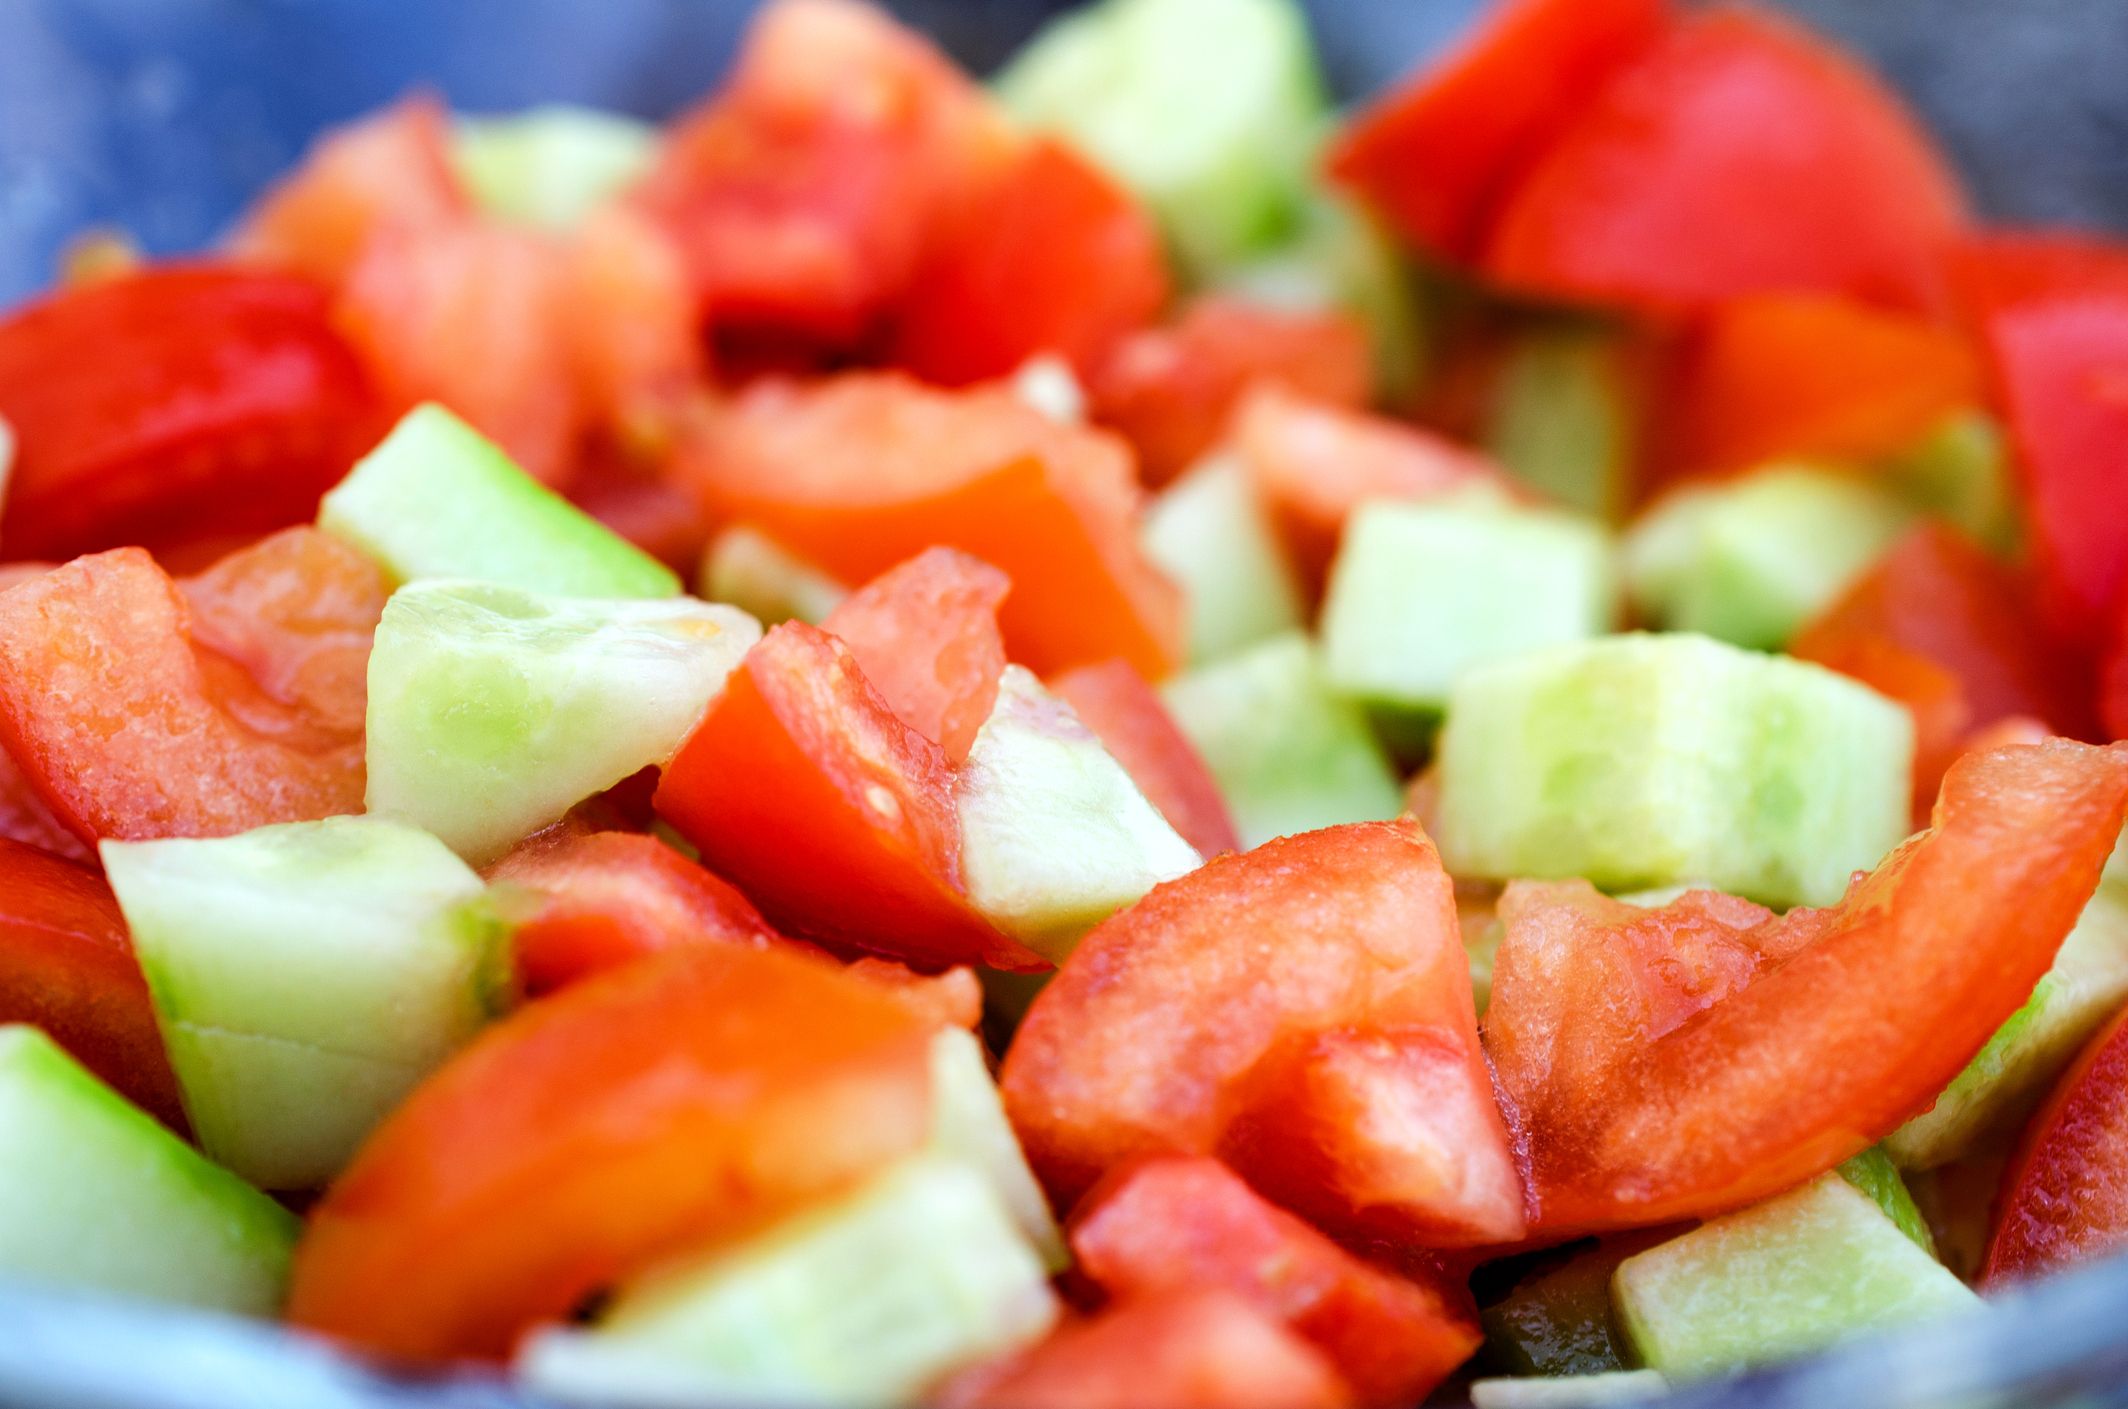 Plate Salad With Tomatoes and Cucumbers